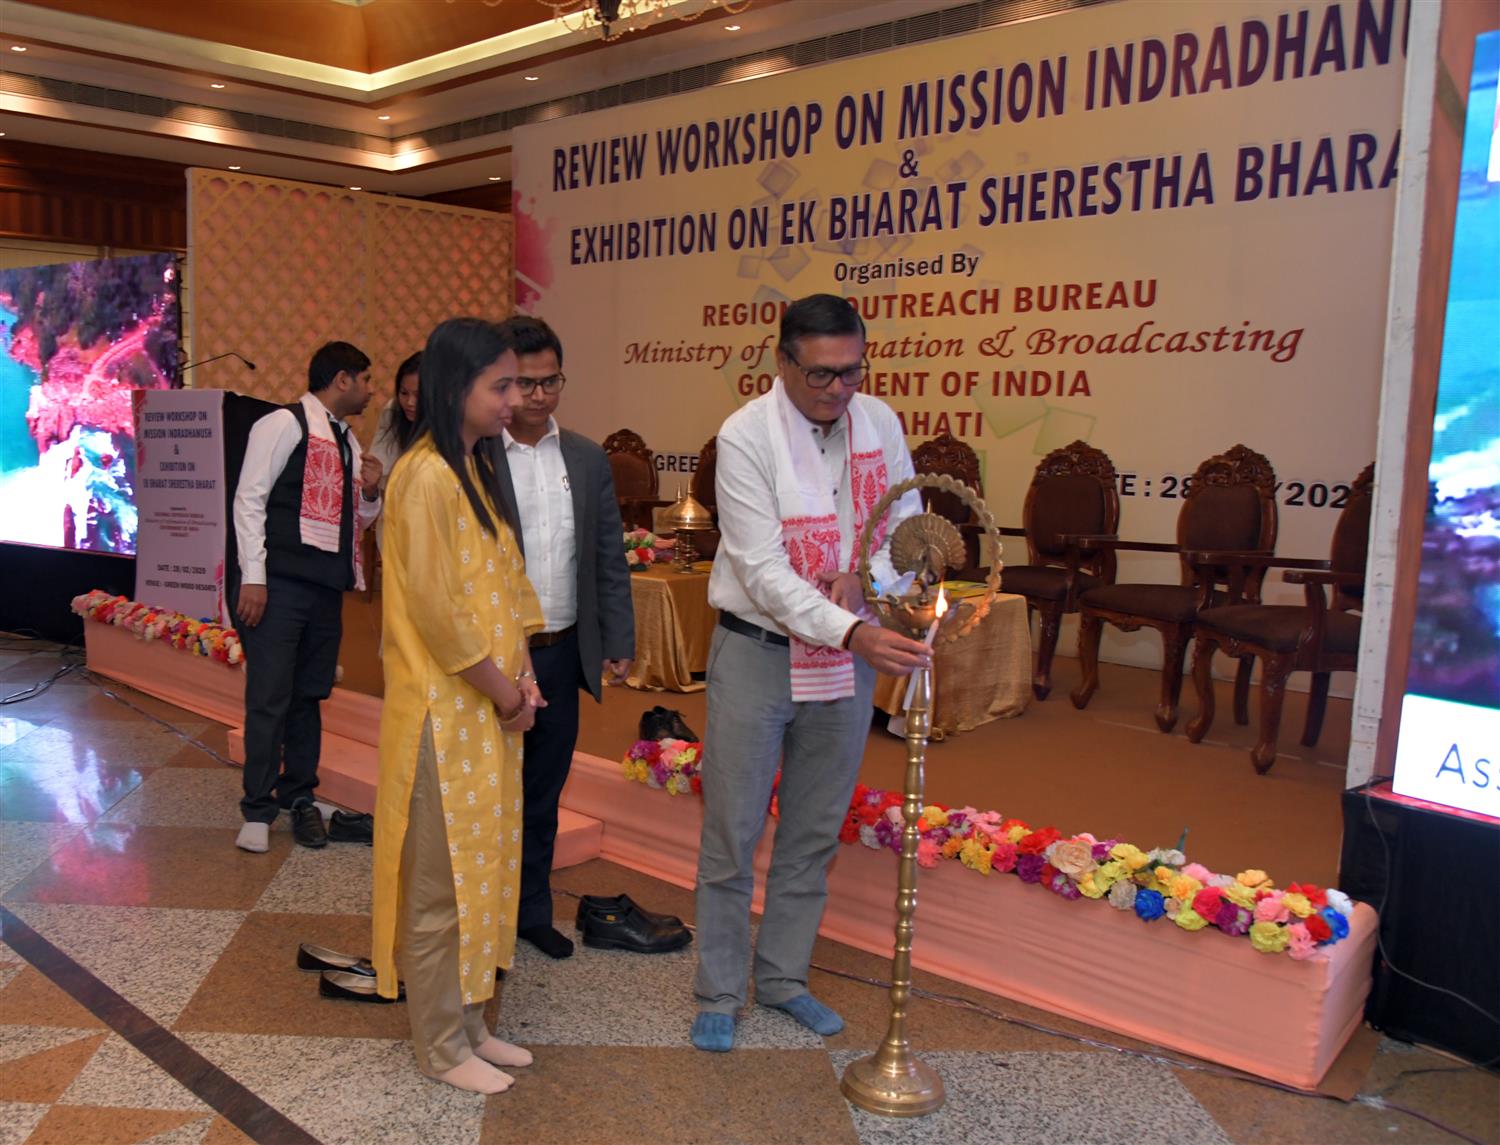  Shri  R. C. Jain, Chairman, SEBA lighting the lamp to inaugurate  Review Workshop on Mission Indradhanush 2.0 organized by Regional Outreach Bureau, Government of India  Guwahati on 28th February 2020.